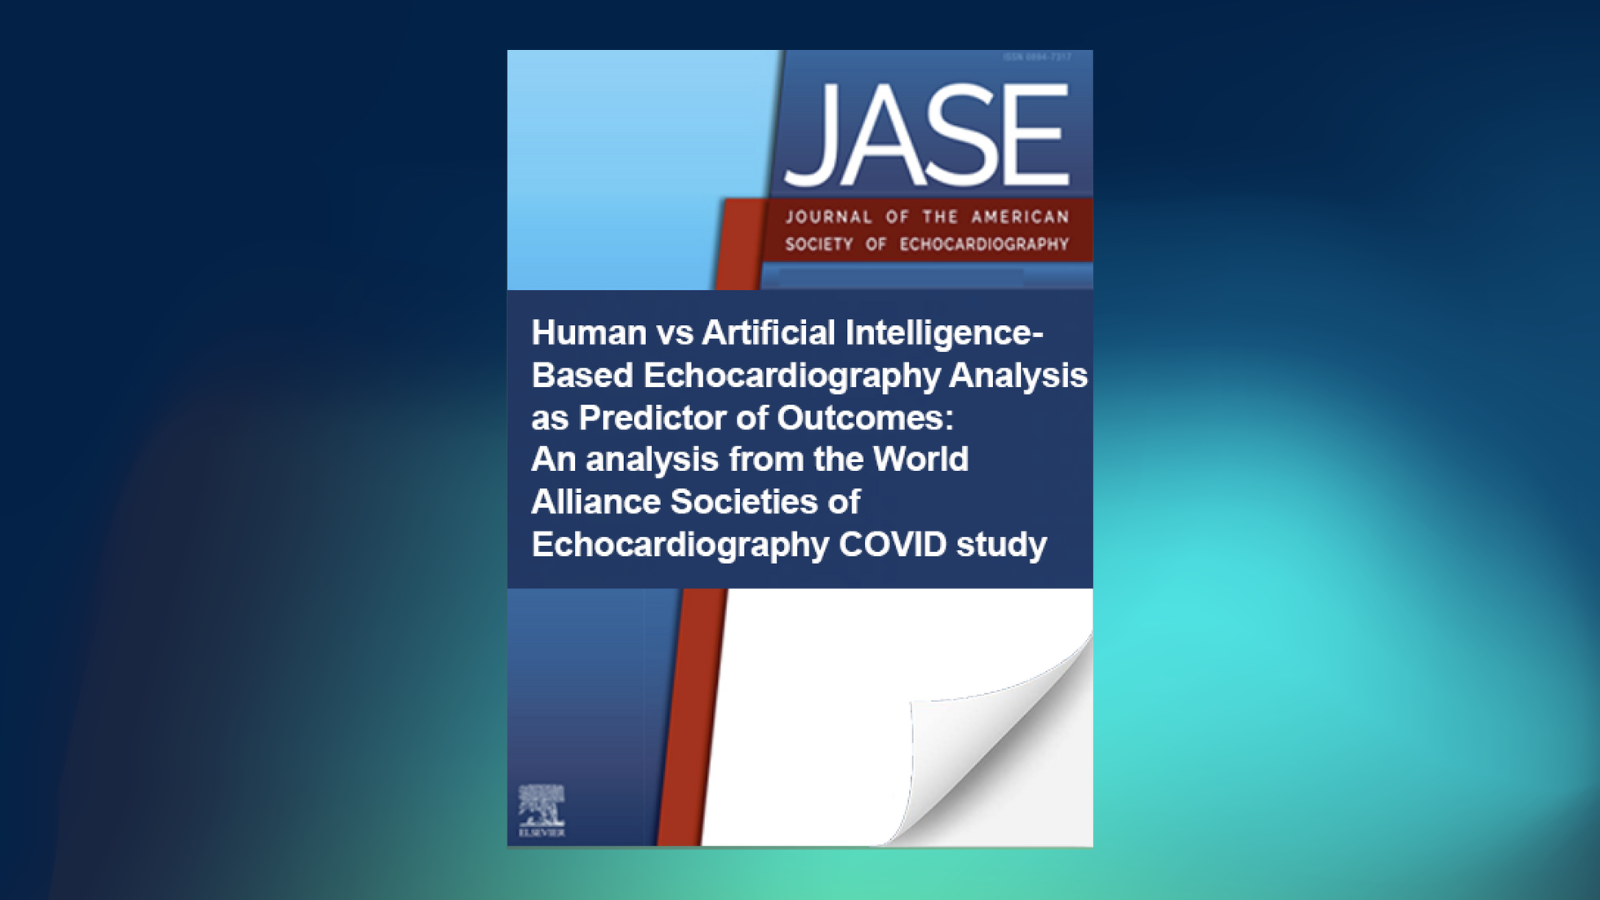 Human vs Artificial Intelligence-Based Echocardiography Analysis as Predictor of Outcomes (WASE-COVID)